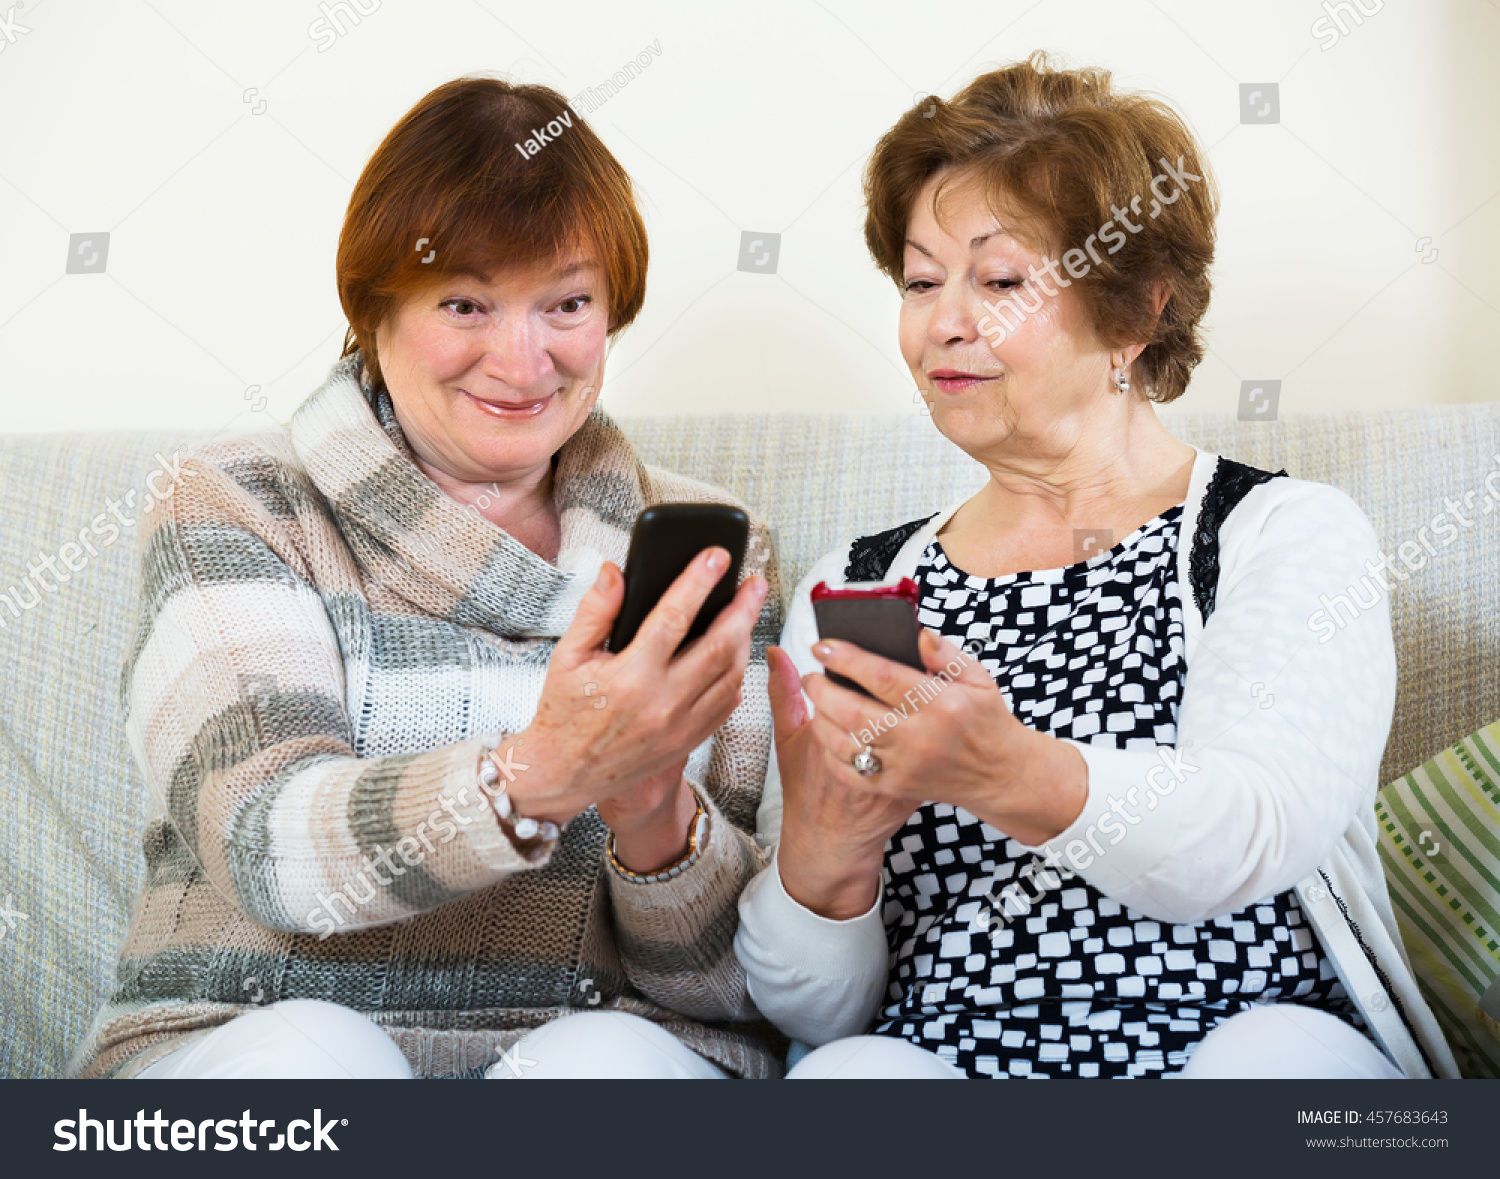 Smiling elderly friends sitting with smartphones in living room #457683643